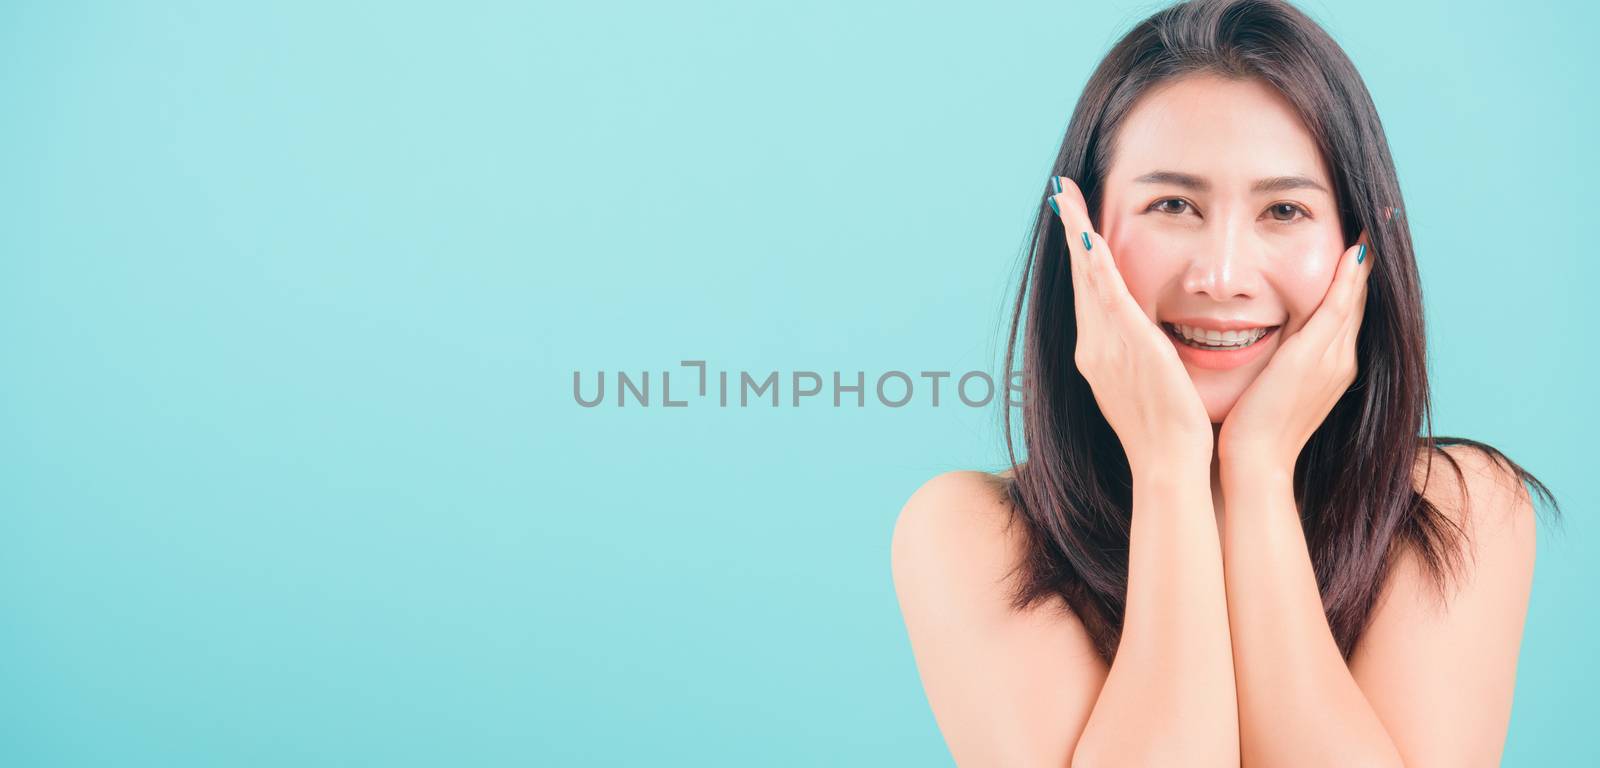 Asian happy portrait beautiful young woman standing smiling surprised excited her hands over her face and looking to camera on blue background with banner copy space for text